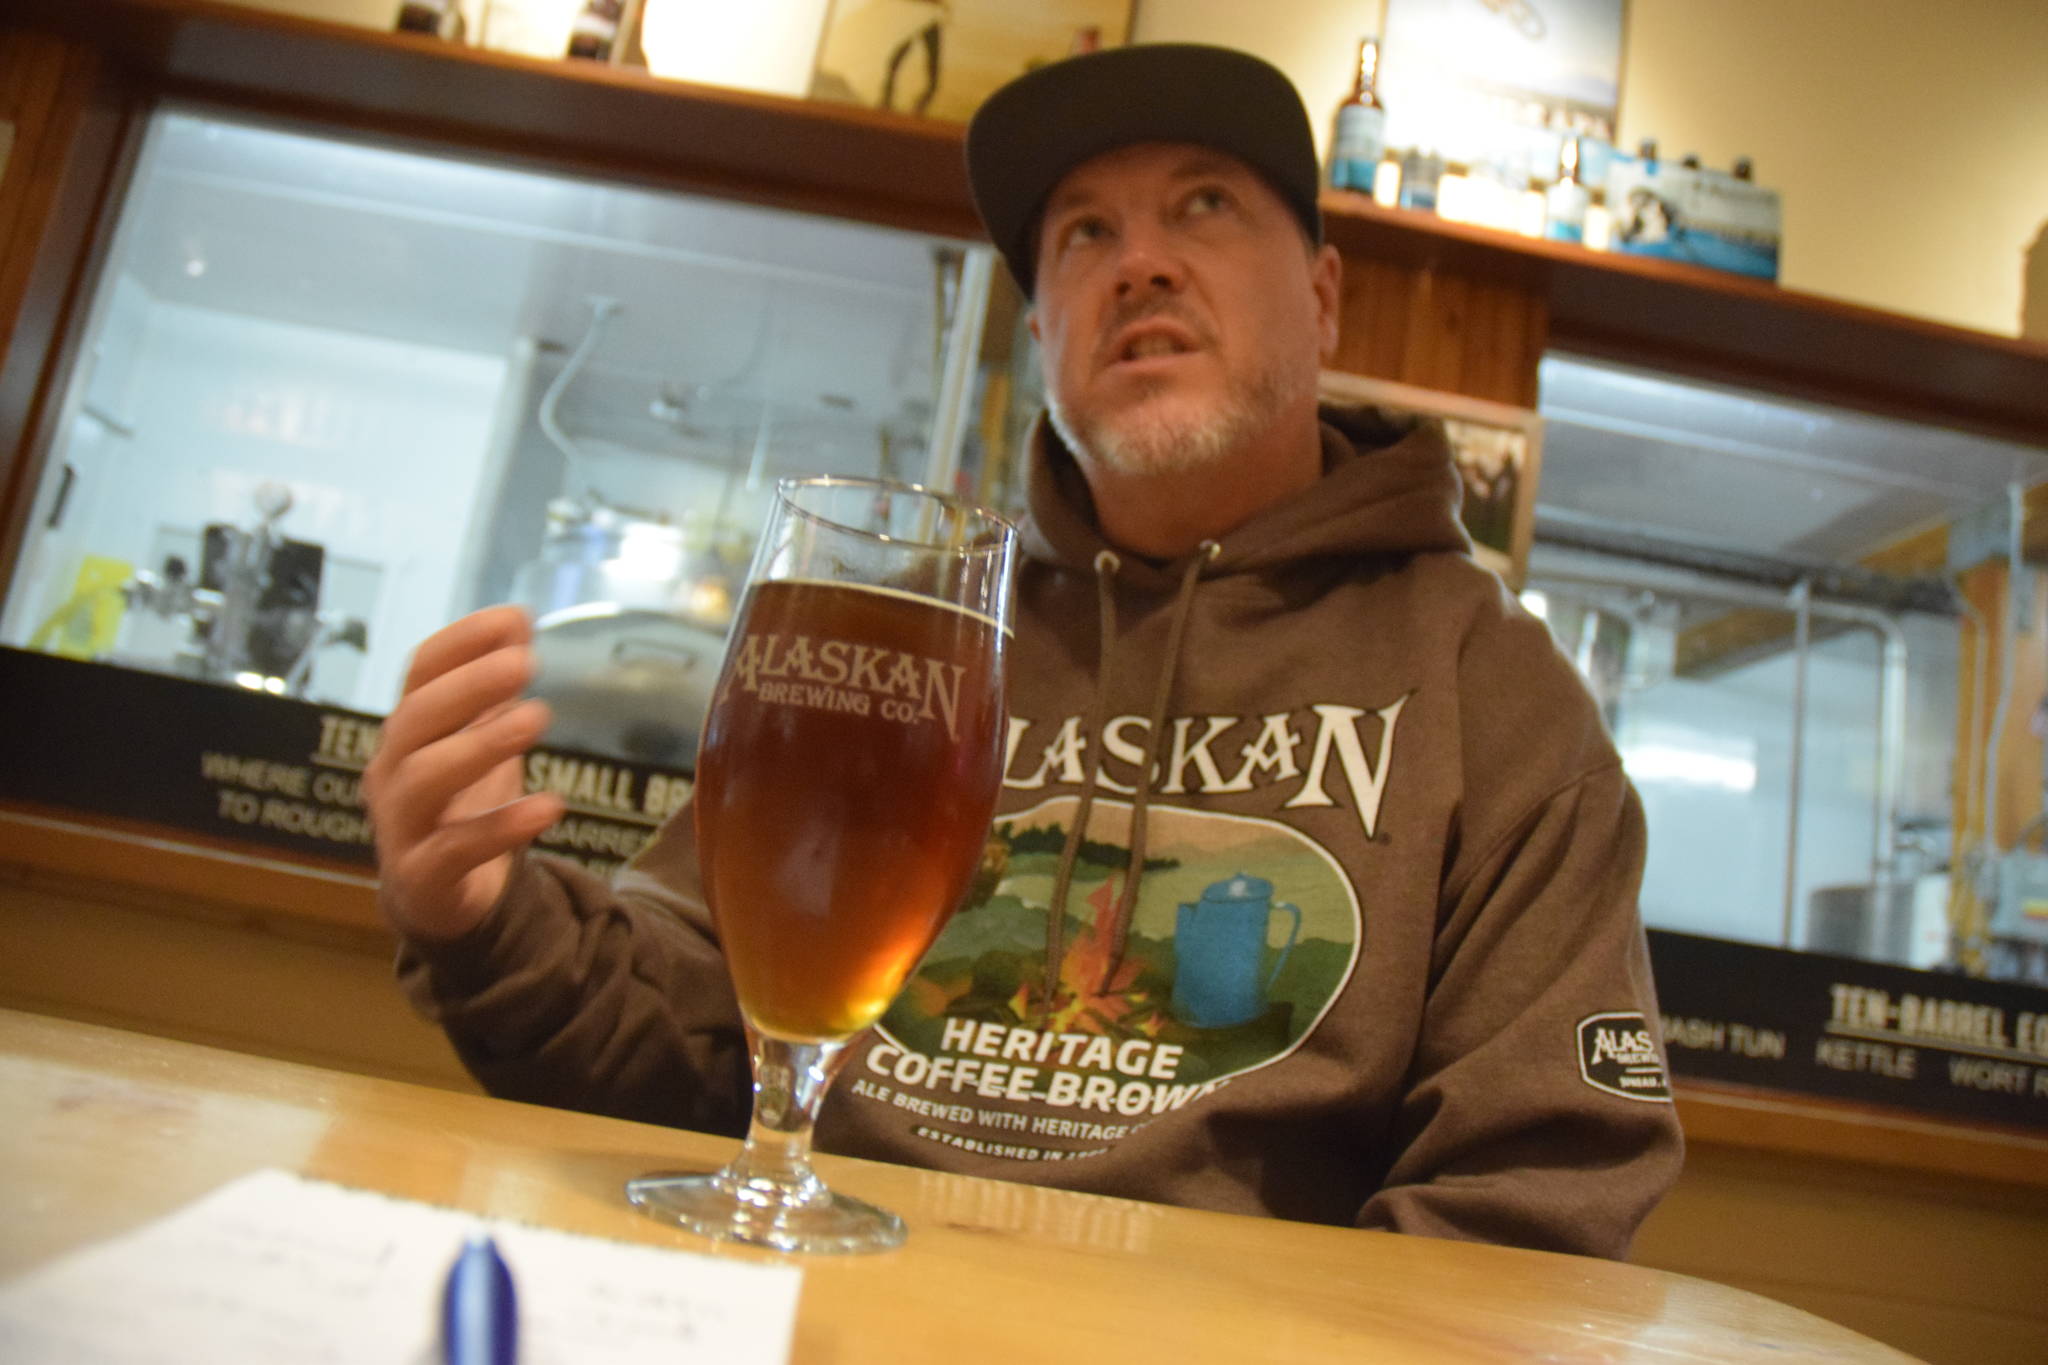 Alaskan Brewing Co.’s Darin Jensen talks about the companies award-winning collaboration with Heritage Coffee Roasting Company. The joint venture won gold in the coffee category at the Great American Beer Festival on Saturday in Denver. (Kevin Gullufsen | Juneau Empire)